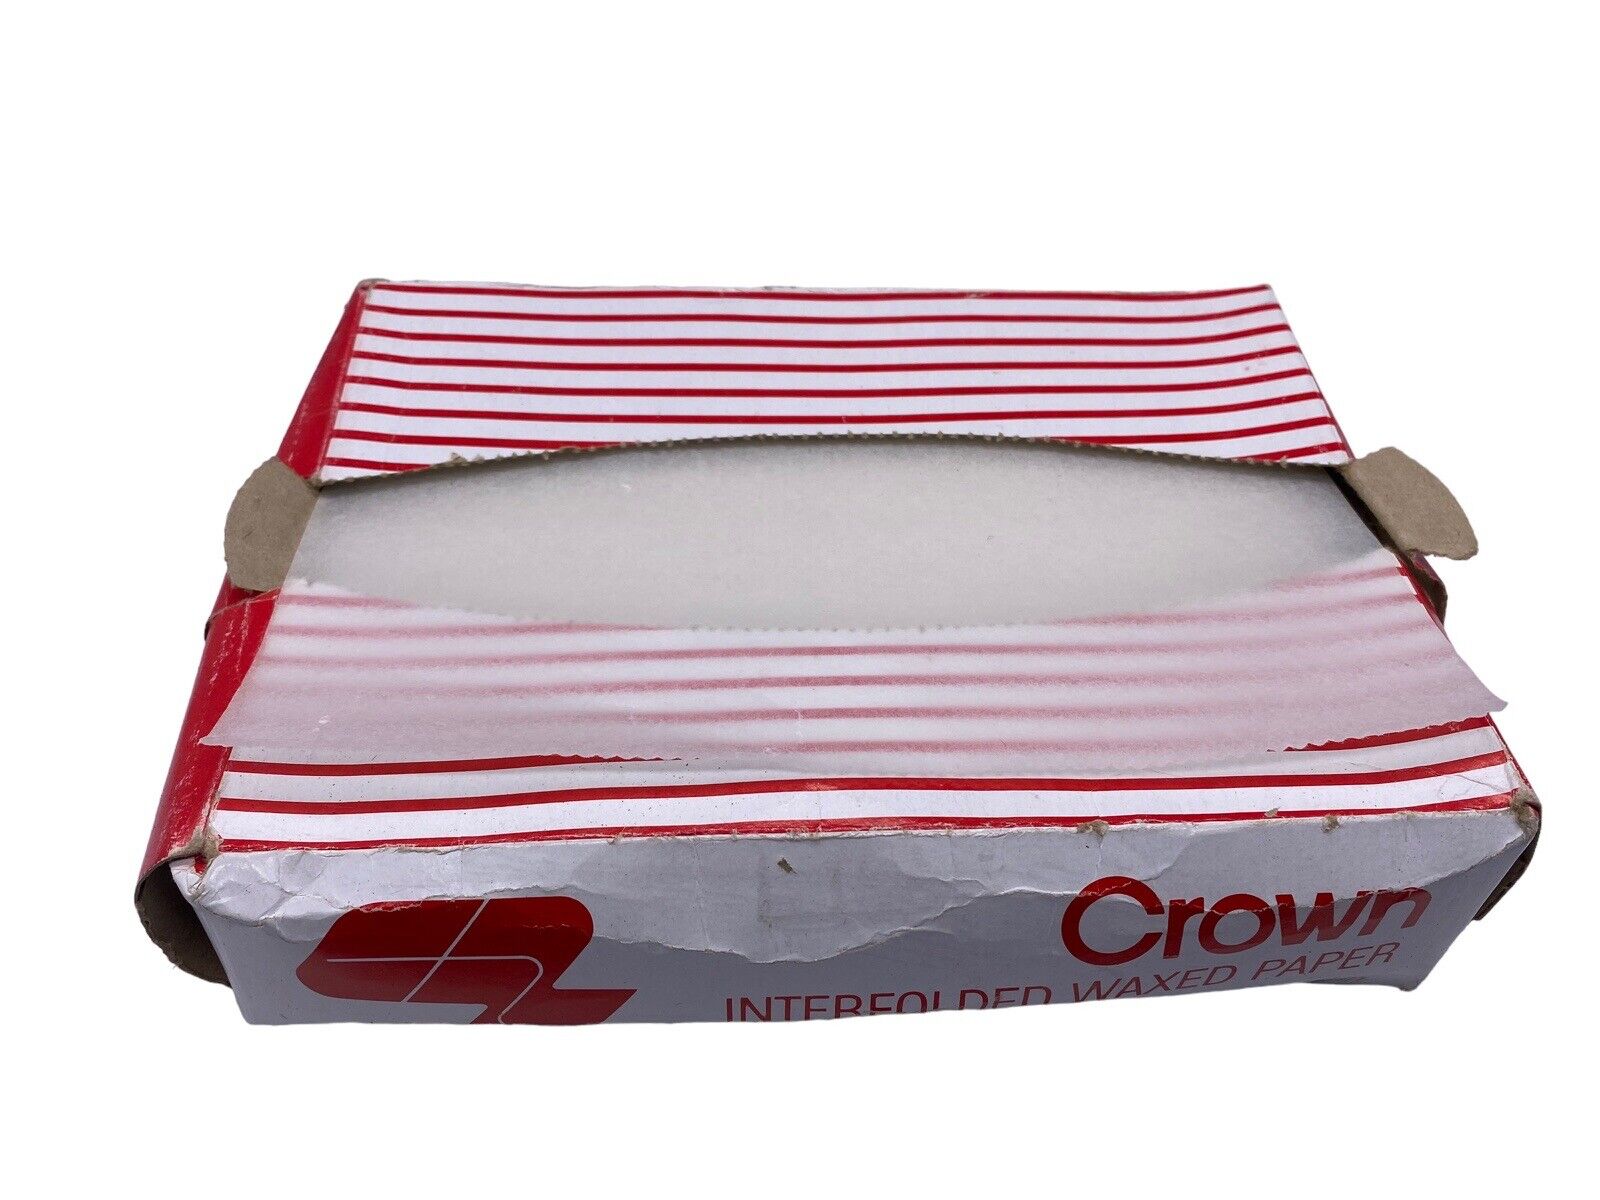 Vintage Crown Interfolded Waxed Paper 1960s 1970s Big Box Rare Advertising